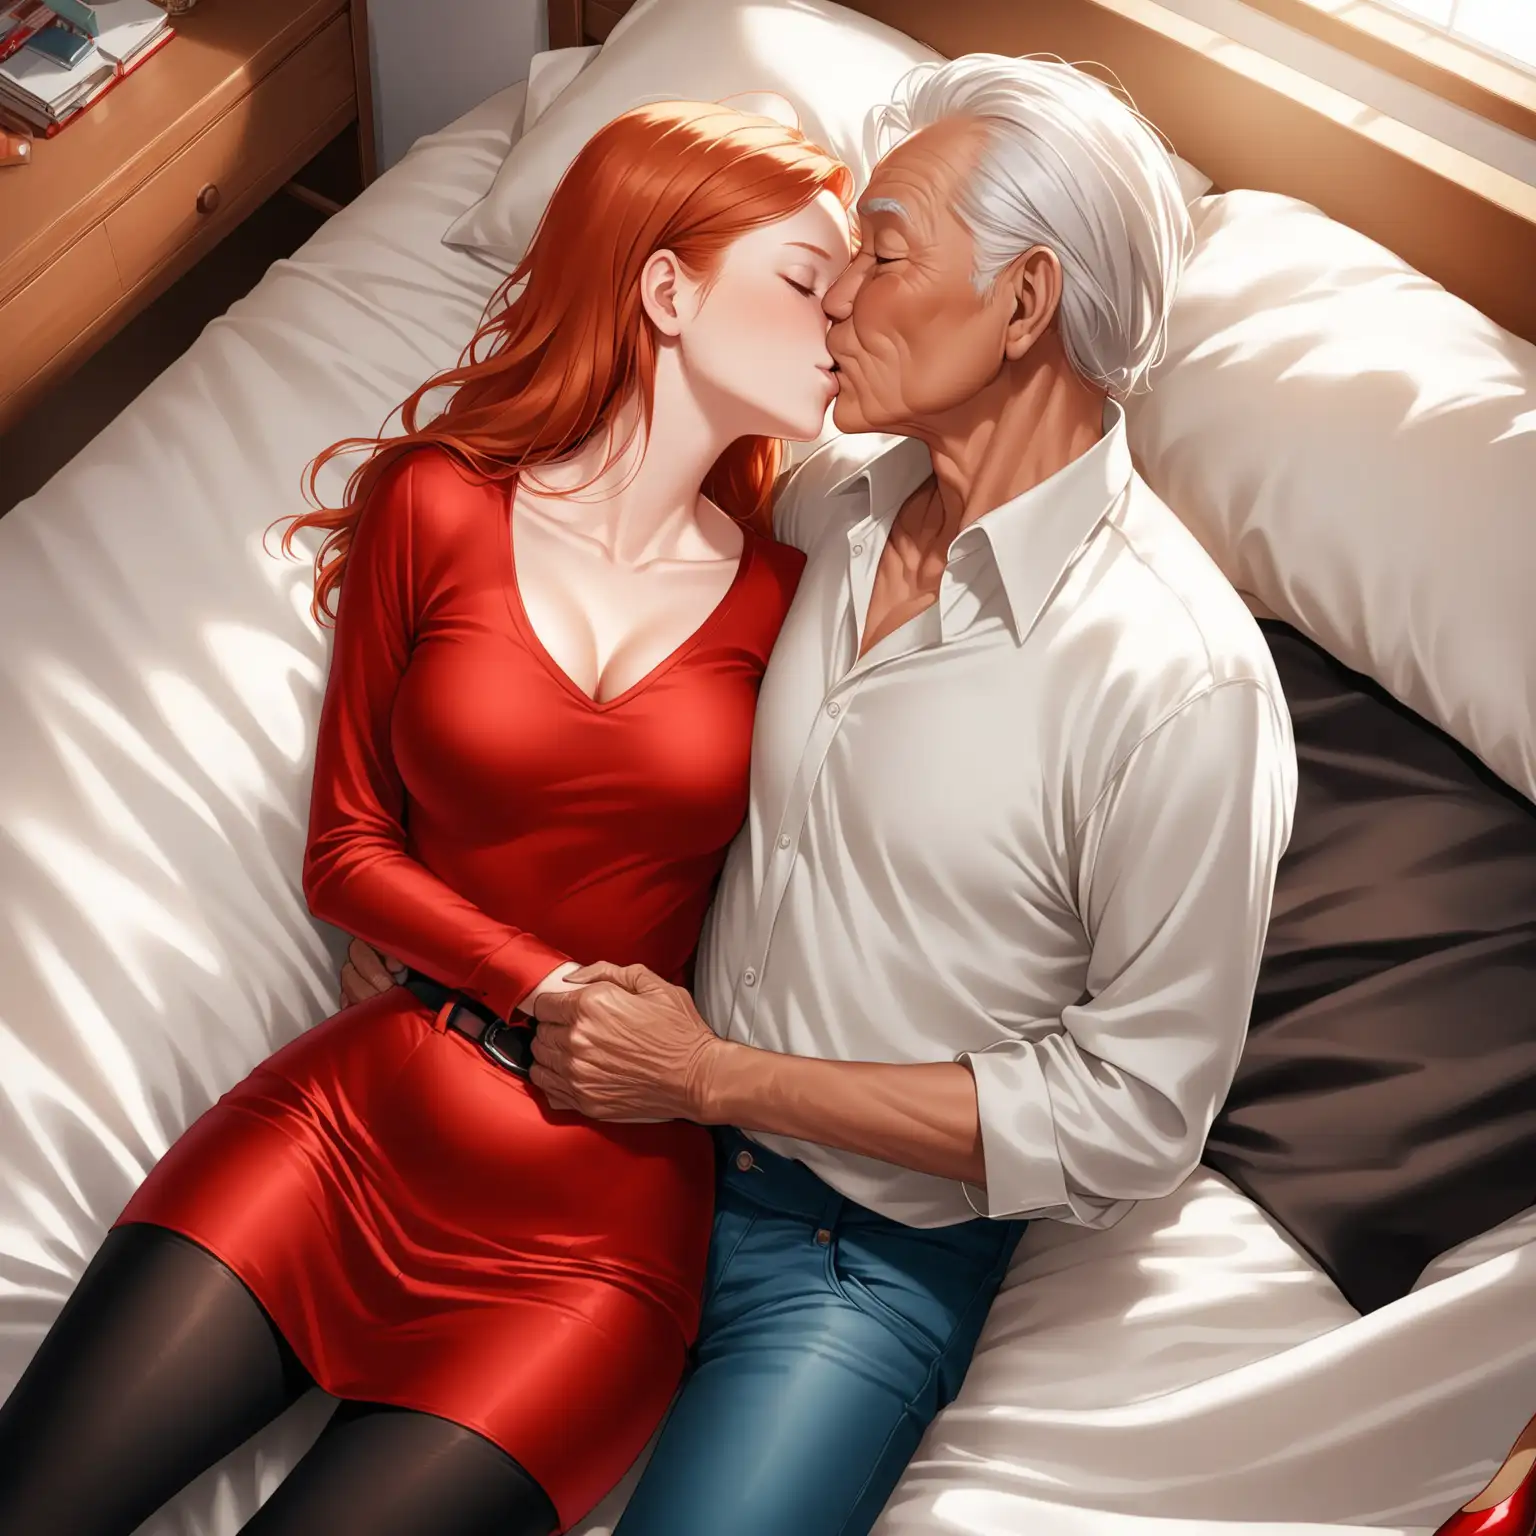 Passionate Elderly Andean Man and Ginny Weasley Embracing in WellLit Bedroom